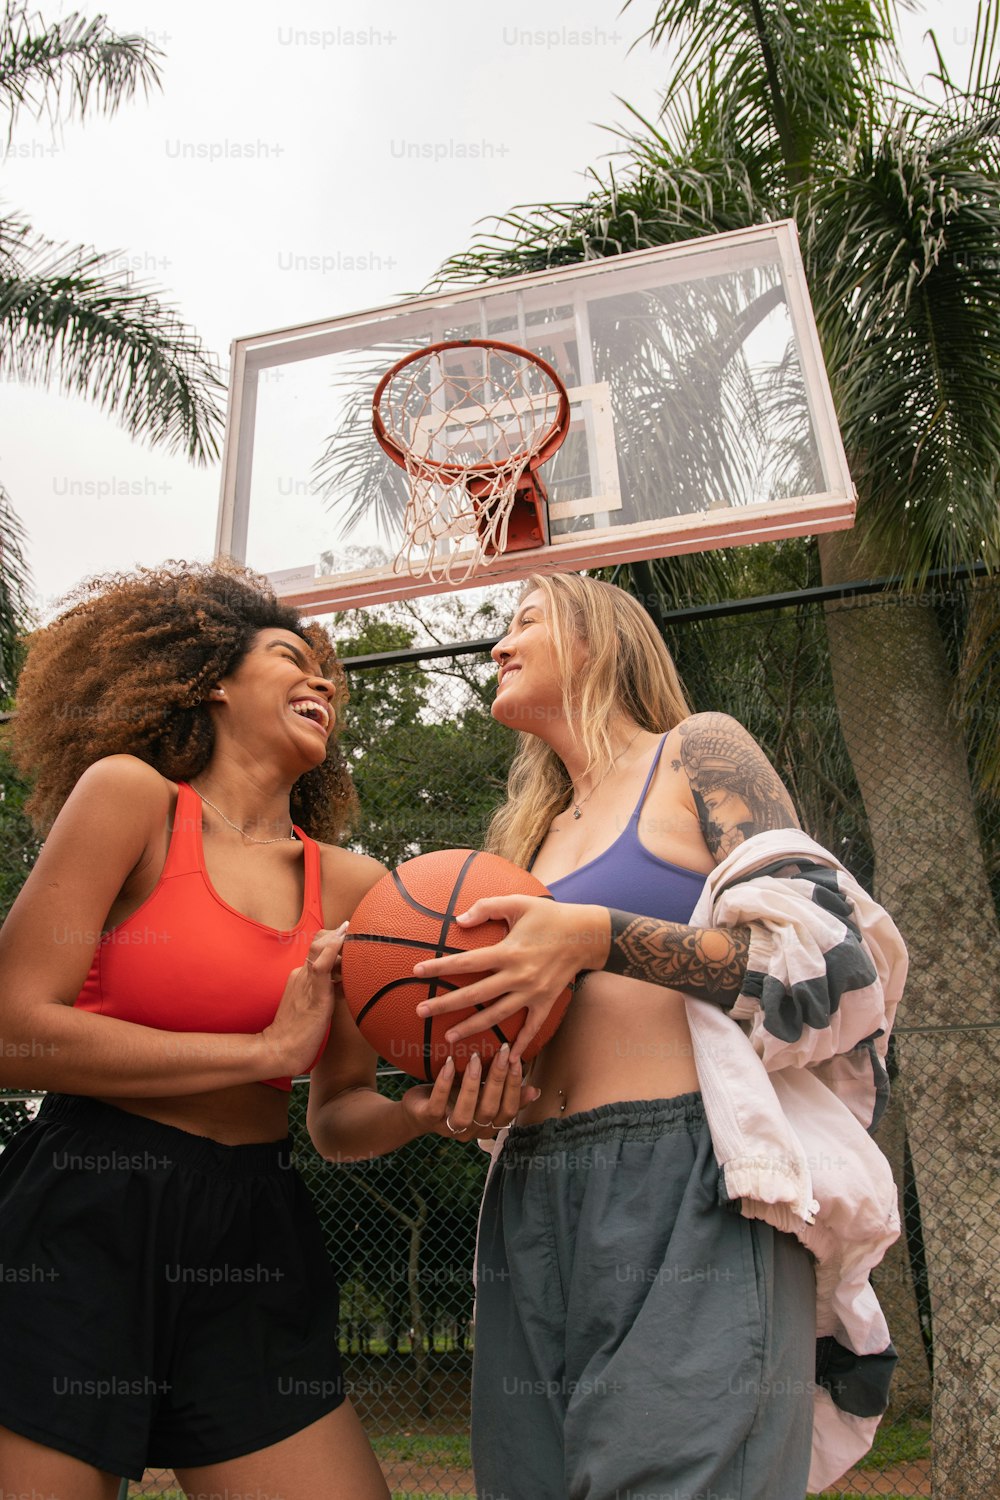 two women standing next to each other holding a basketball